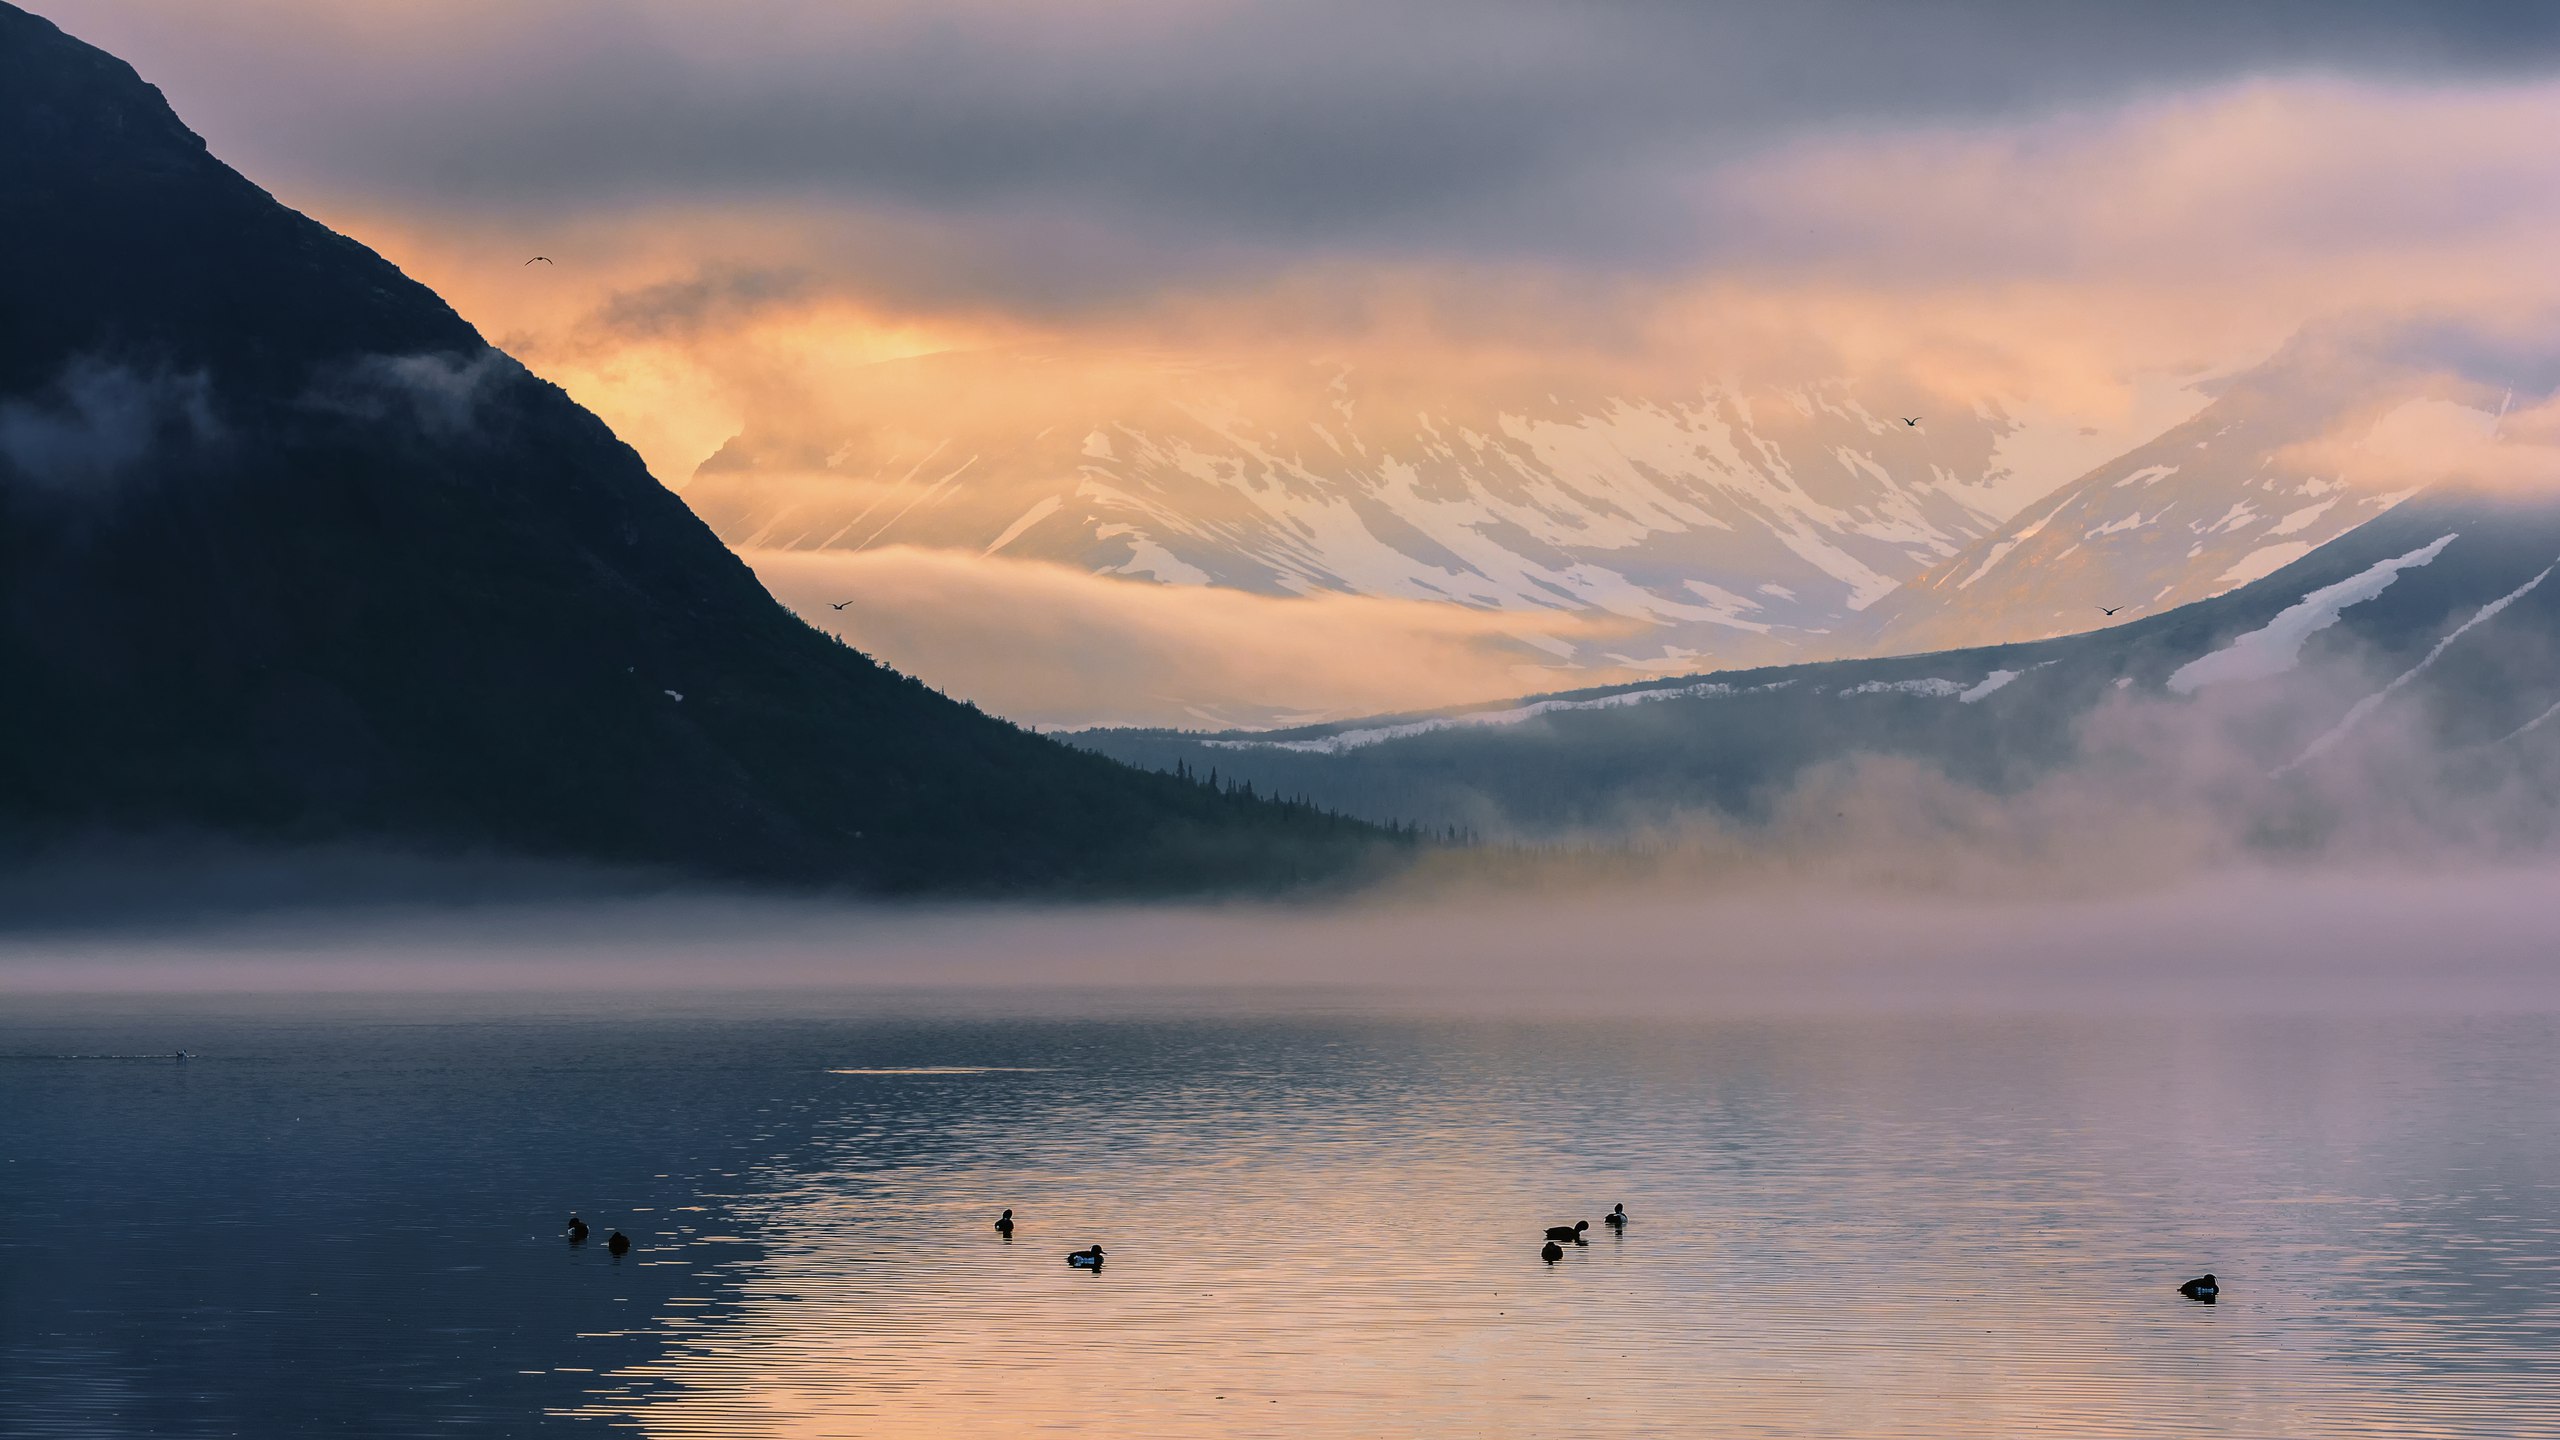 General 2560x1440 nature landscape mountains snow water lake river mist clouds duck sky